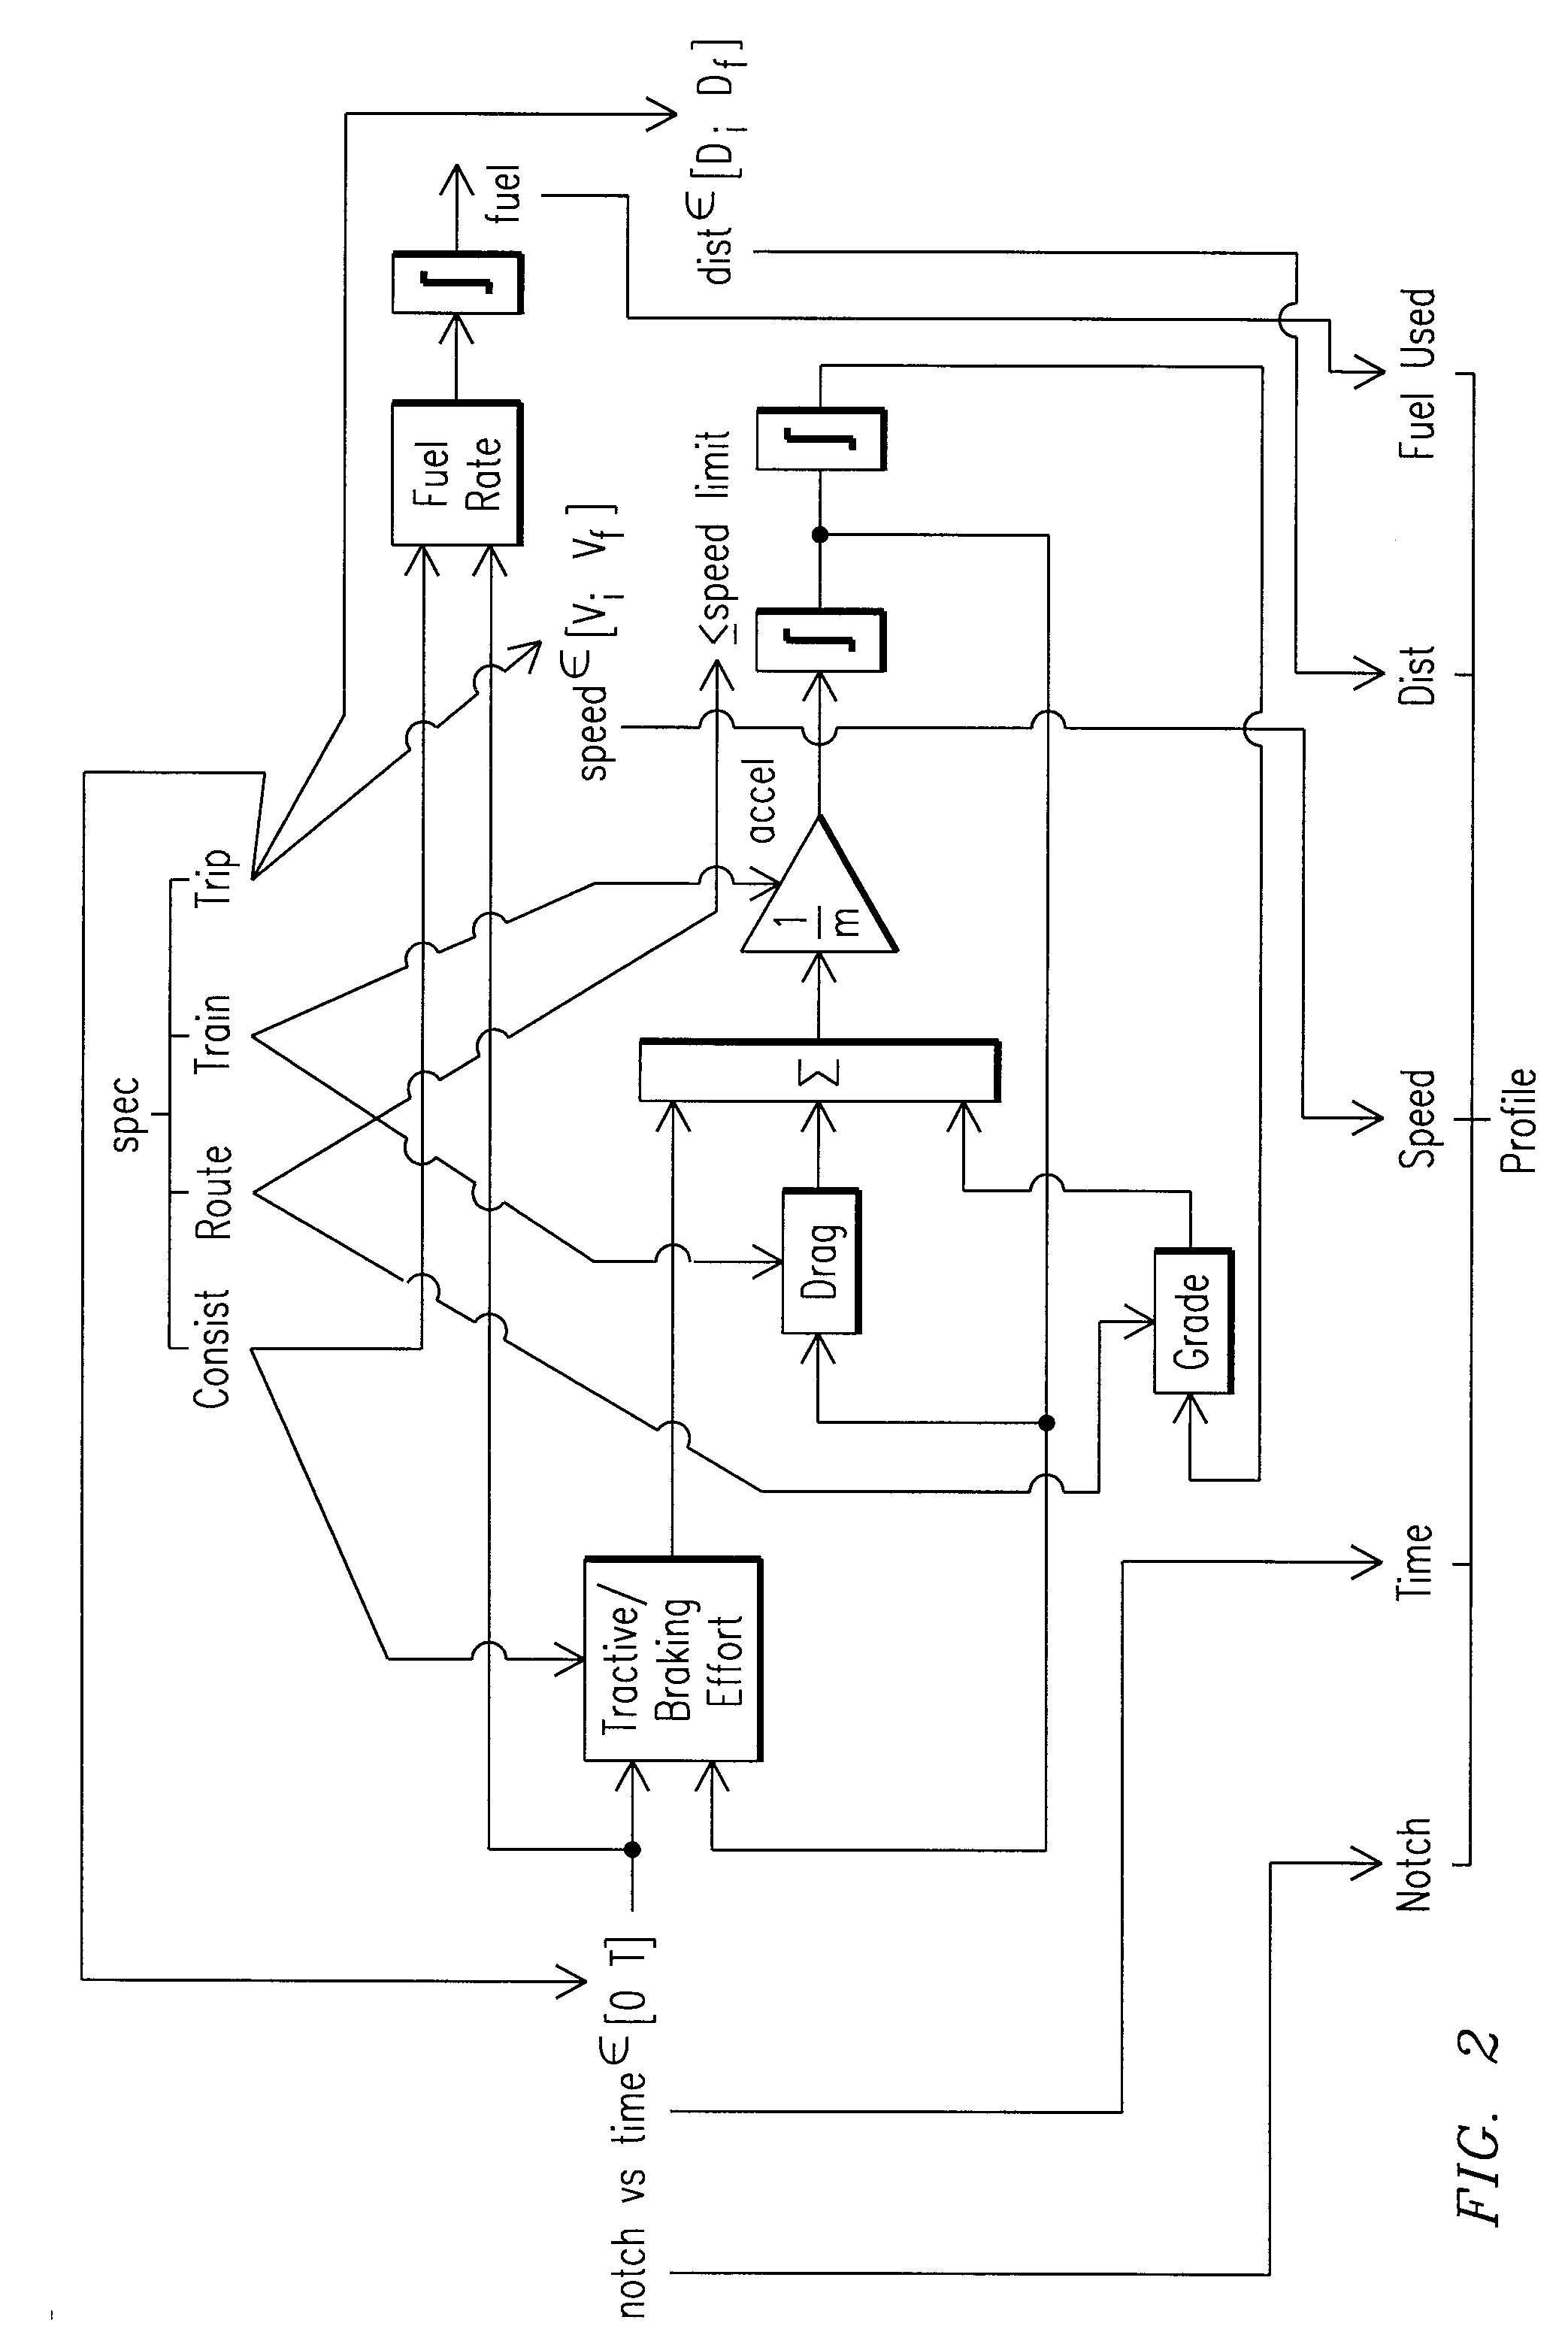 System and method for optimized fuel efficiency and emission output of a diesel powered system